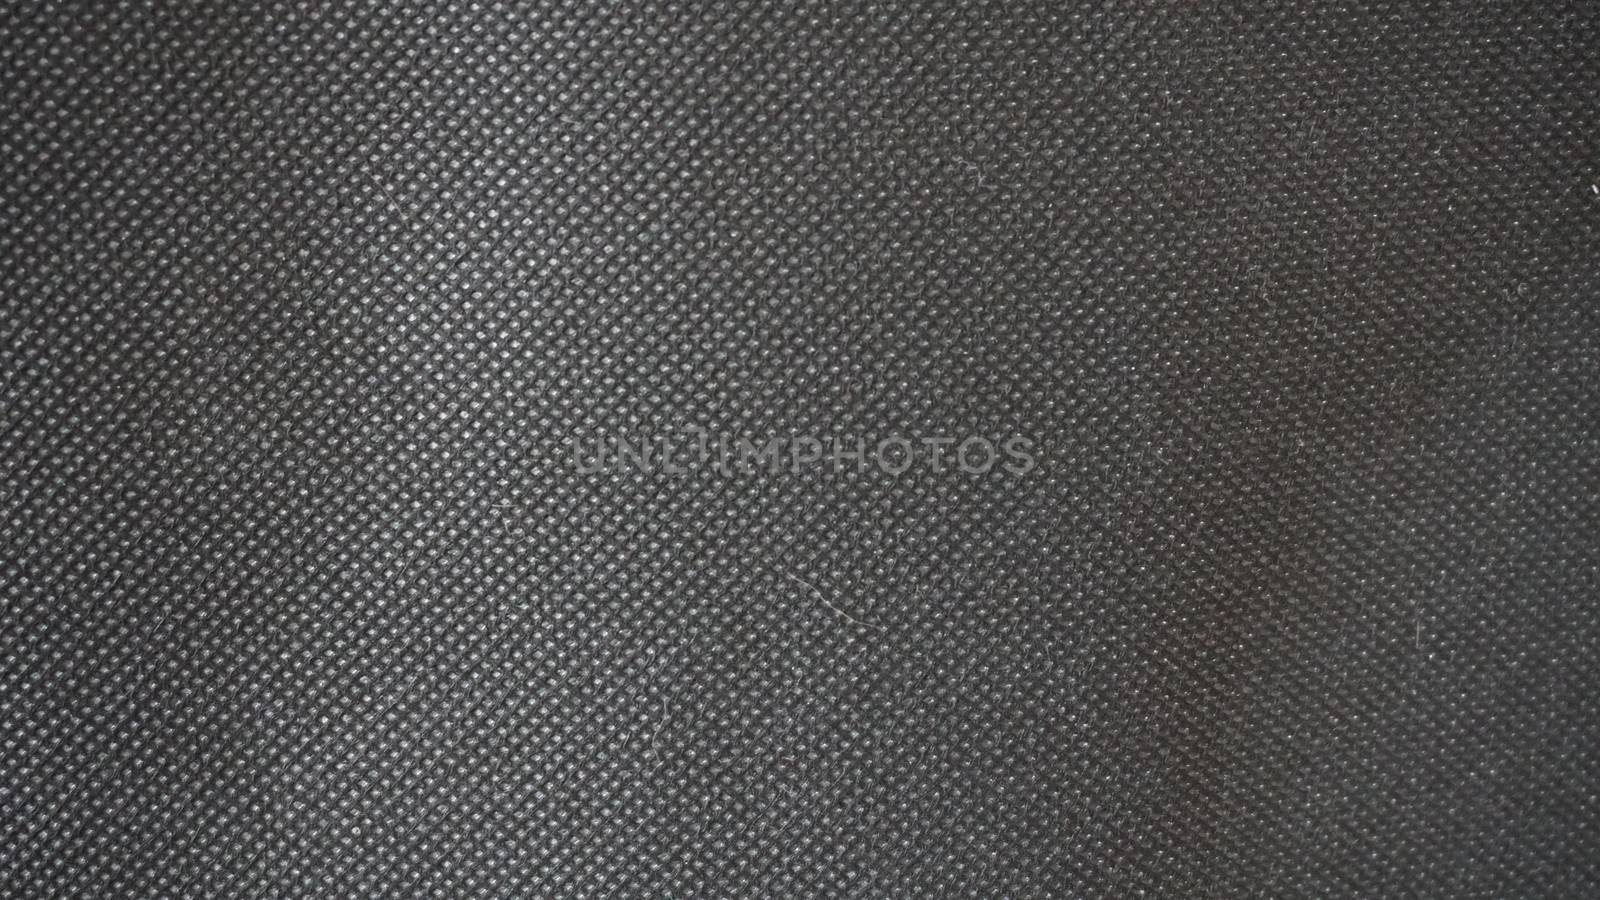 Nylon fabric texture background for design with copy space for text or image.